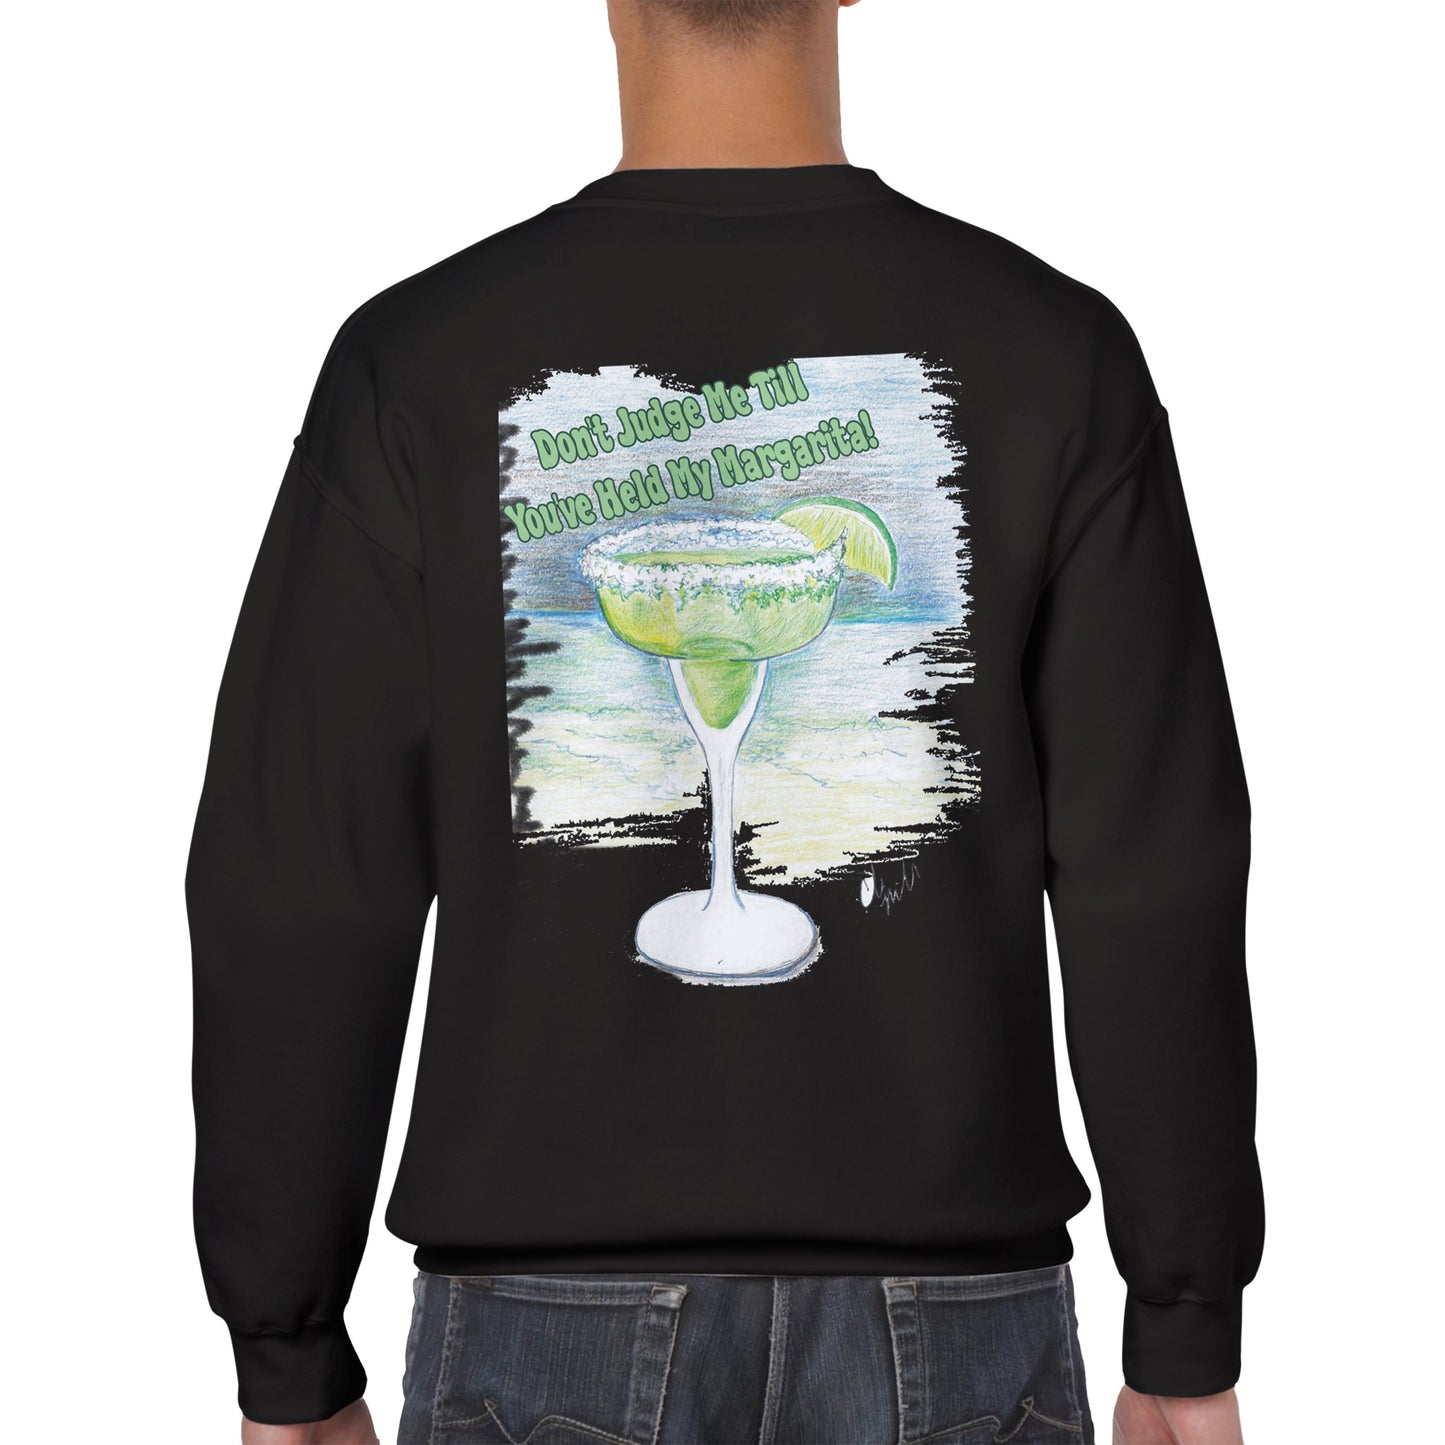 A rear view of short haired male model wearing a black Classic Unisex Crewneck sweatshirt with original artwork and motto Don’t Judge Me Till You’ve Held my margarita on back and Whatya Say logo on front from WhatYa Say Apparel.